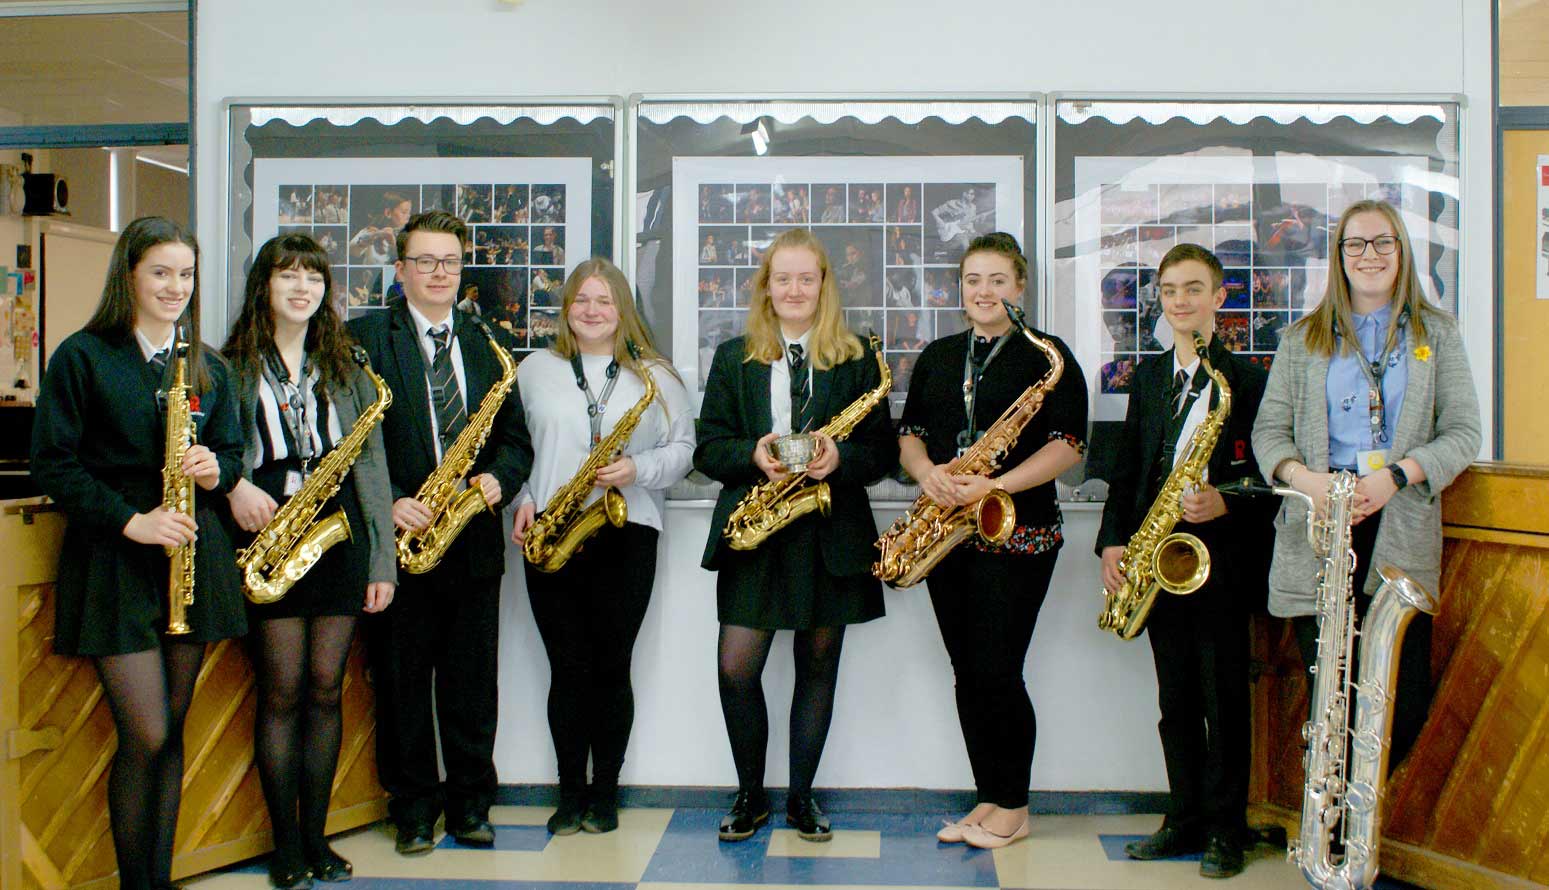 Rossett School’s ‘Saxophonix’ group, who were winners at the Harrogate Competitive Festival for Music, Speech and Drama